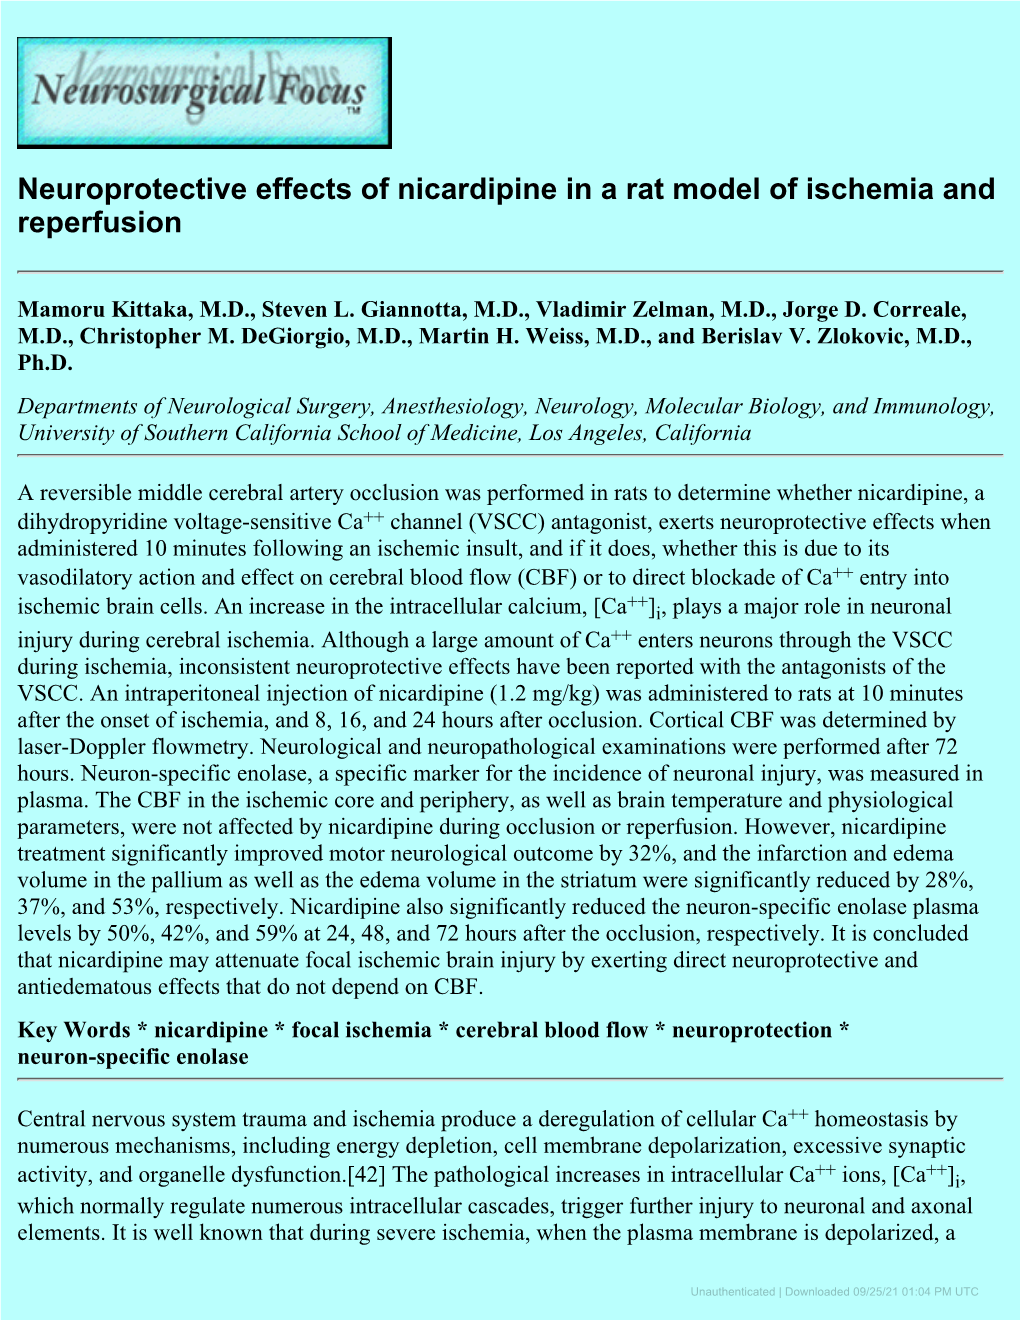 Neuroprotective Effects of Nicardipine in a Rat Model of Ischemia and Reperfusion